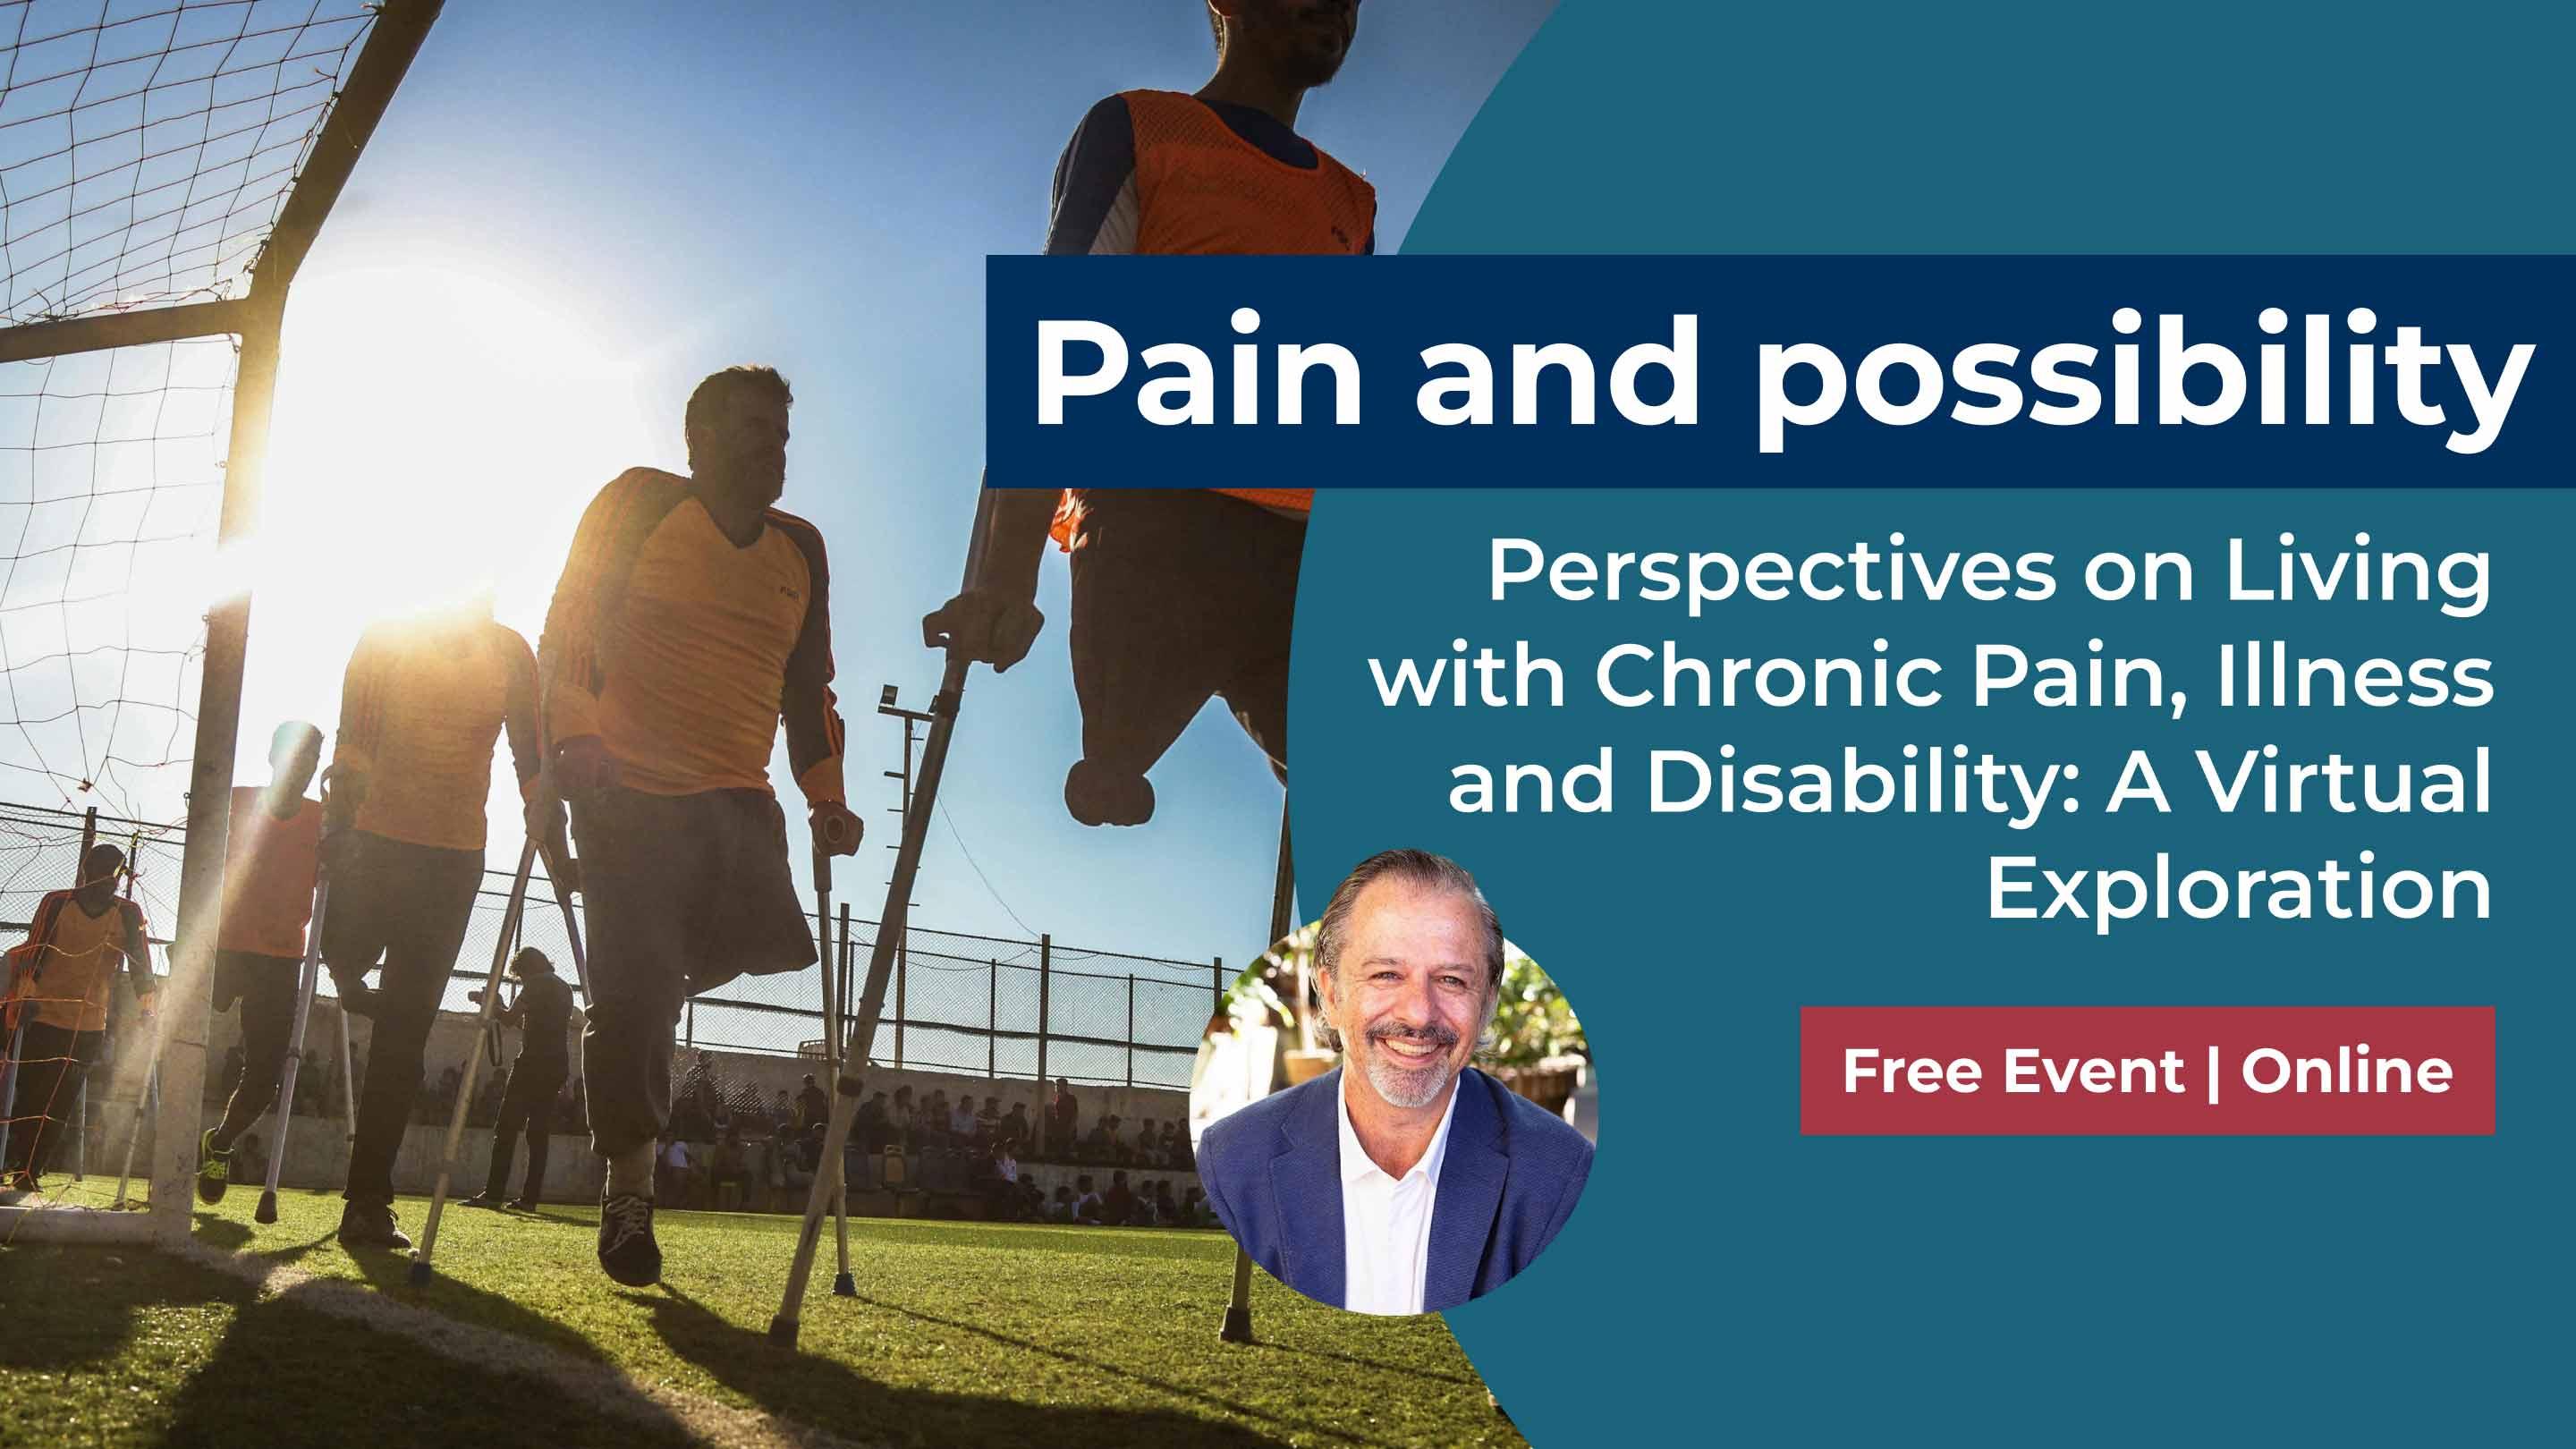 Pain and possibility - Perspectives on Living with Chronic Pain, Illness and Disability: A Virtual Exploration